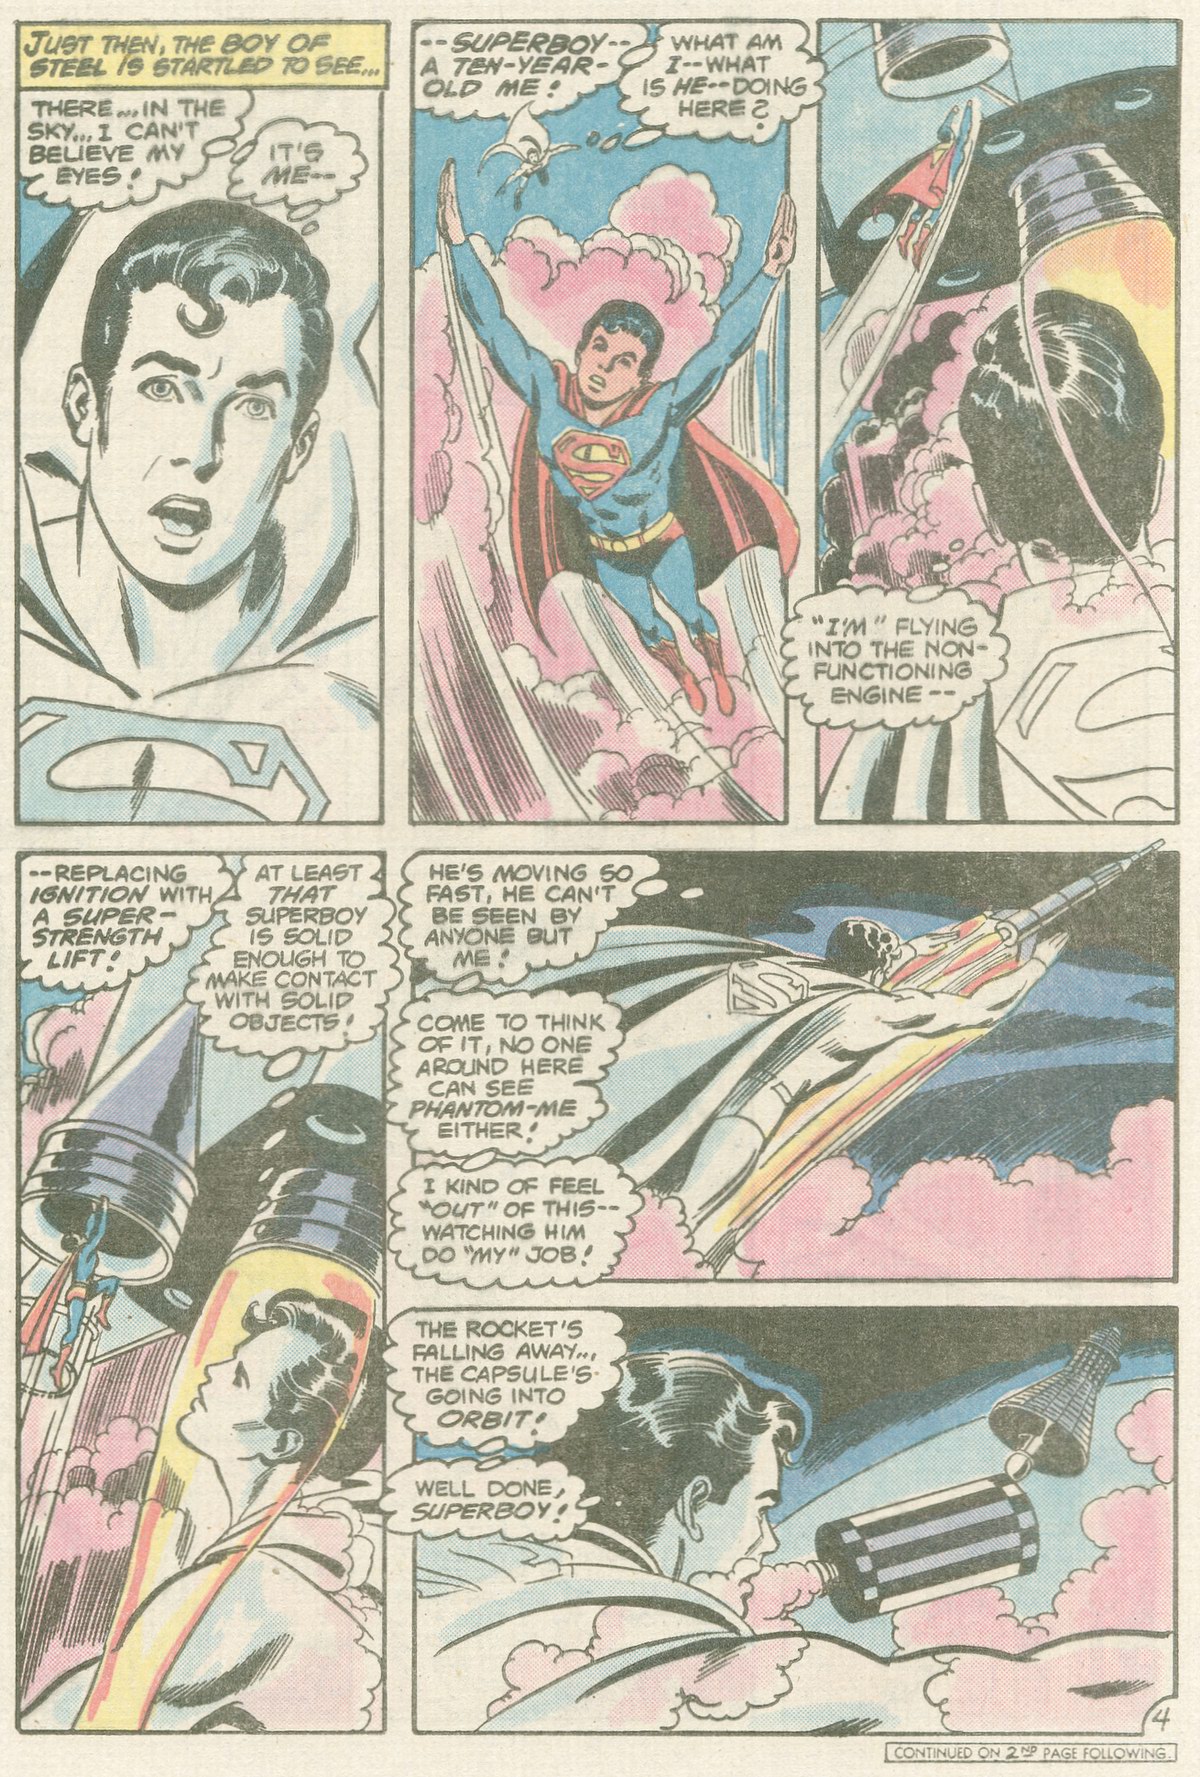 The New Adventures of Superboy 26 Page 23